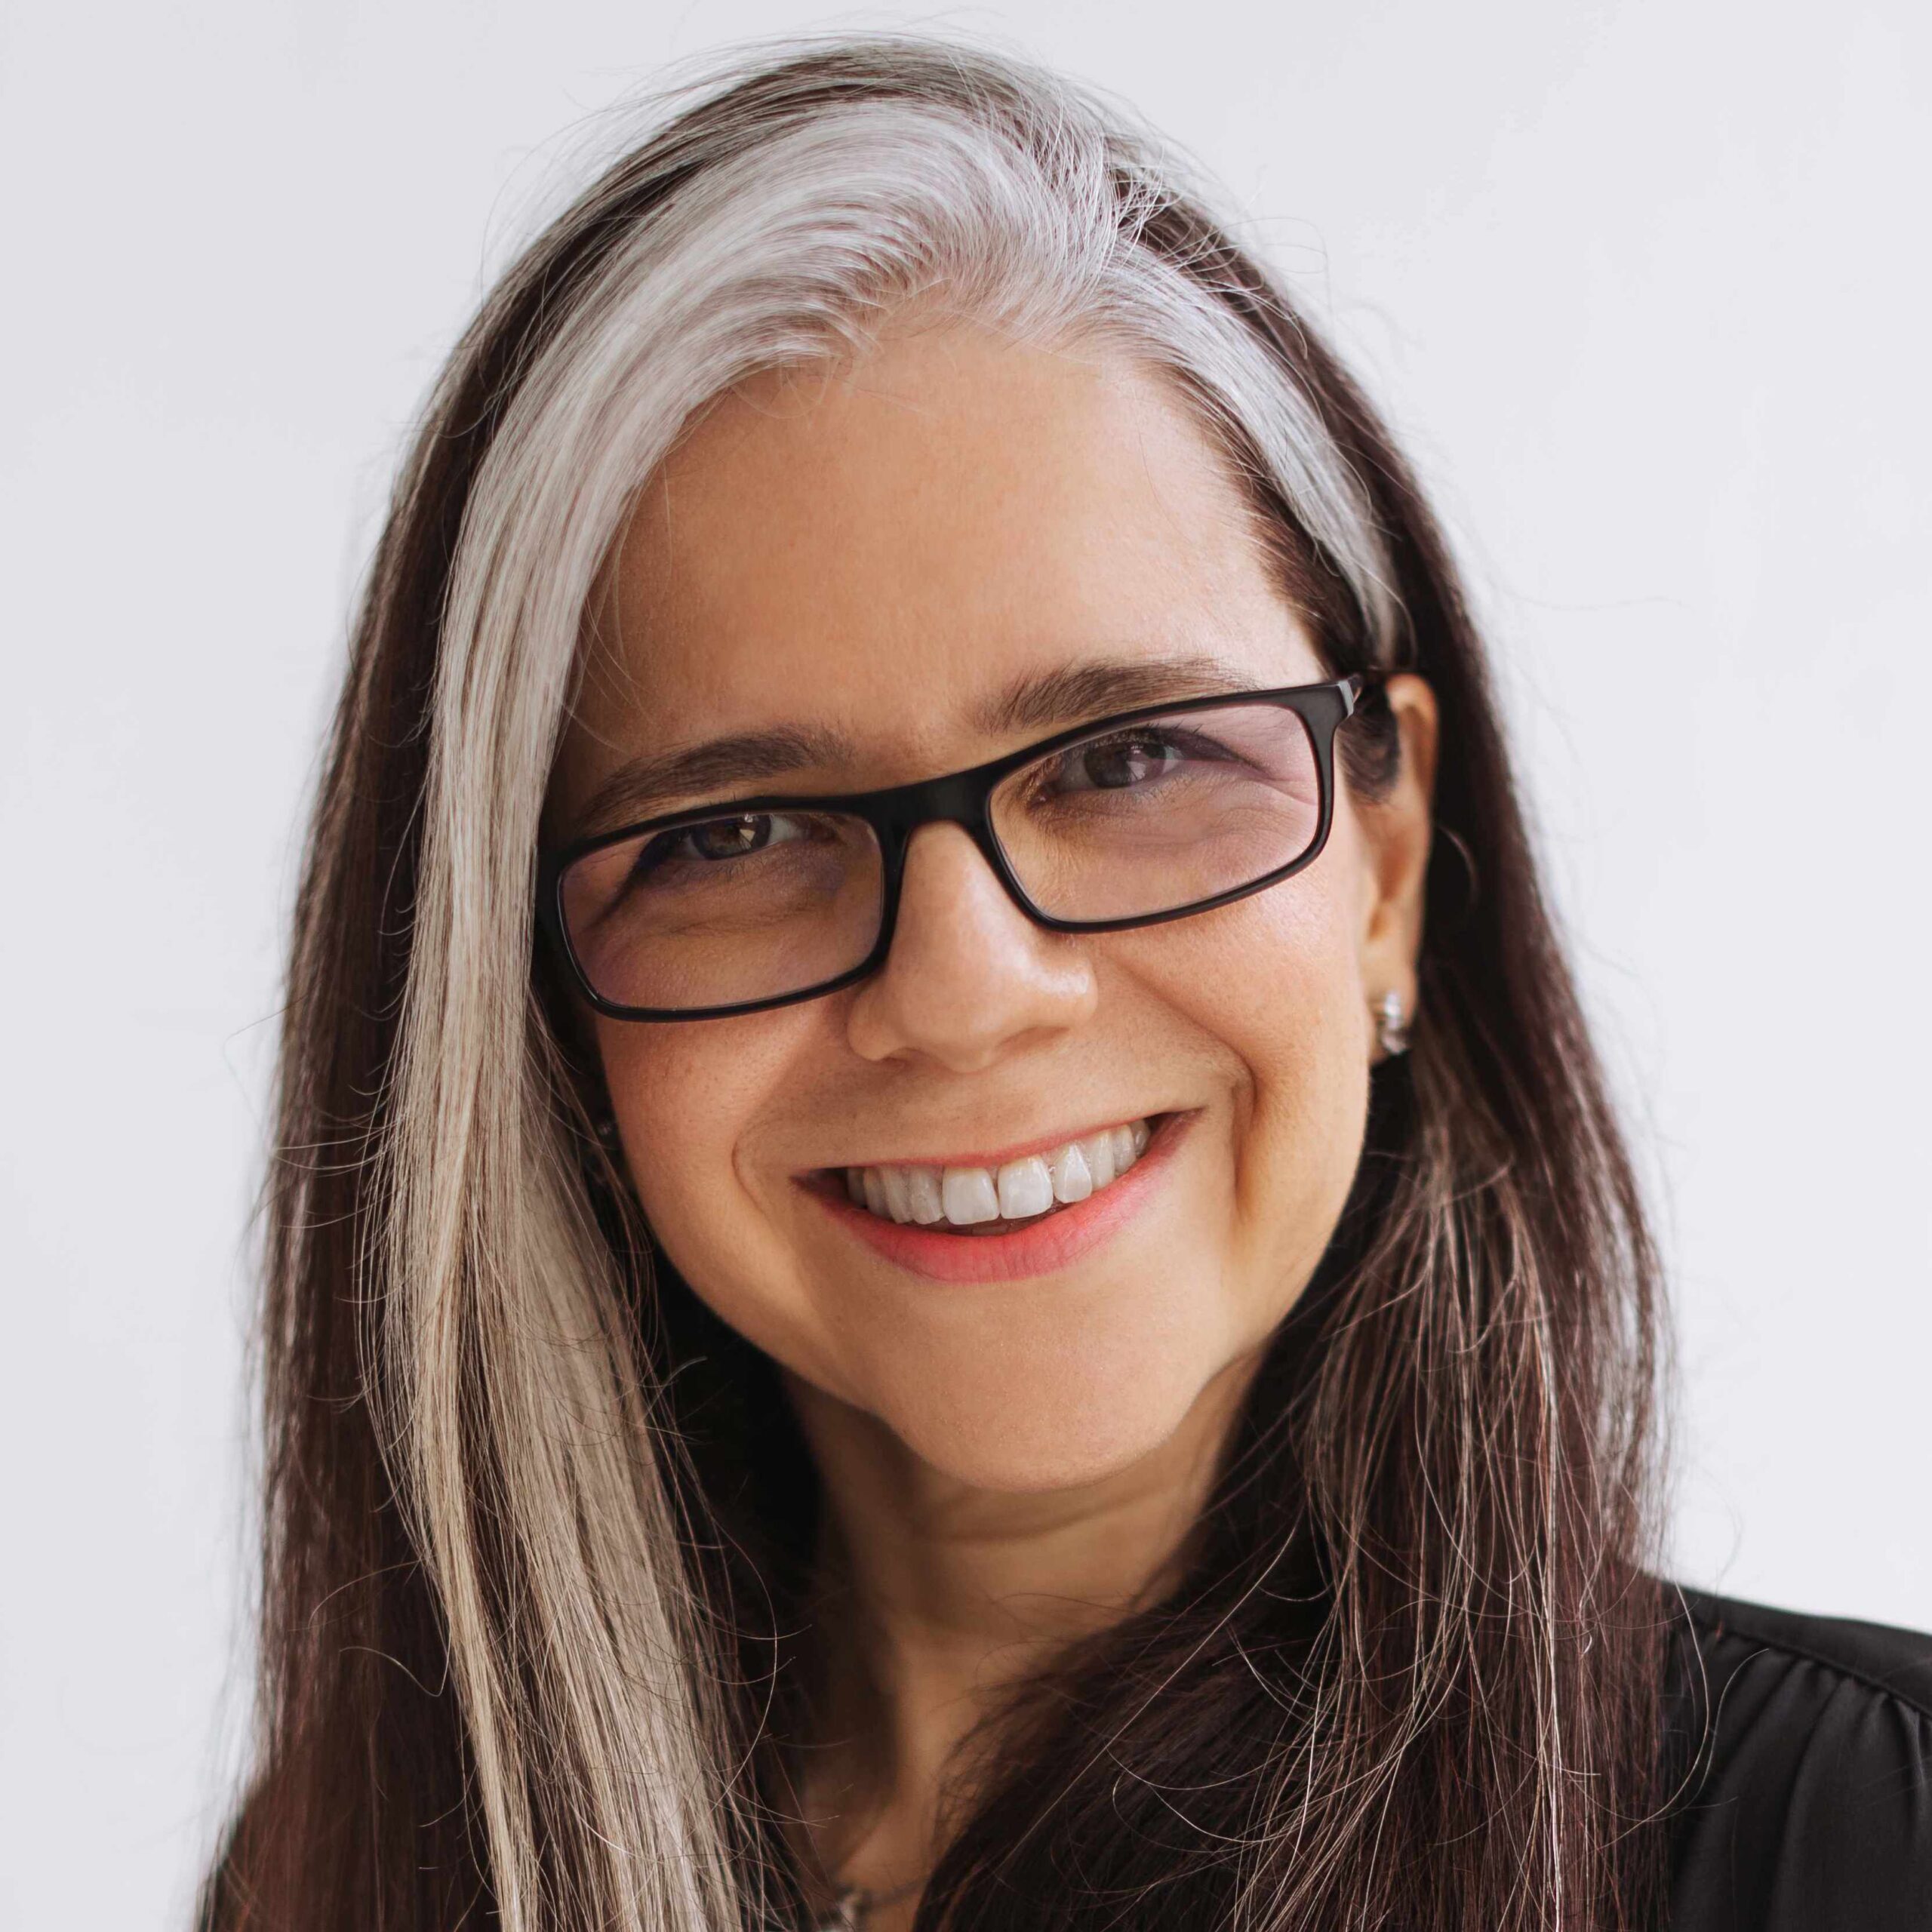 A middle-aged woman with white streaks in her hair. She also has on black spectacles.